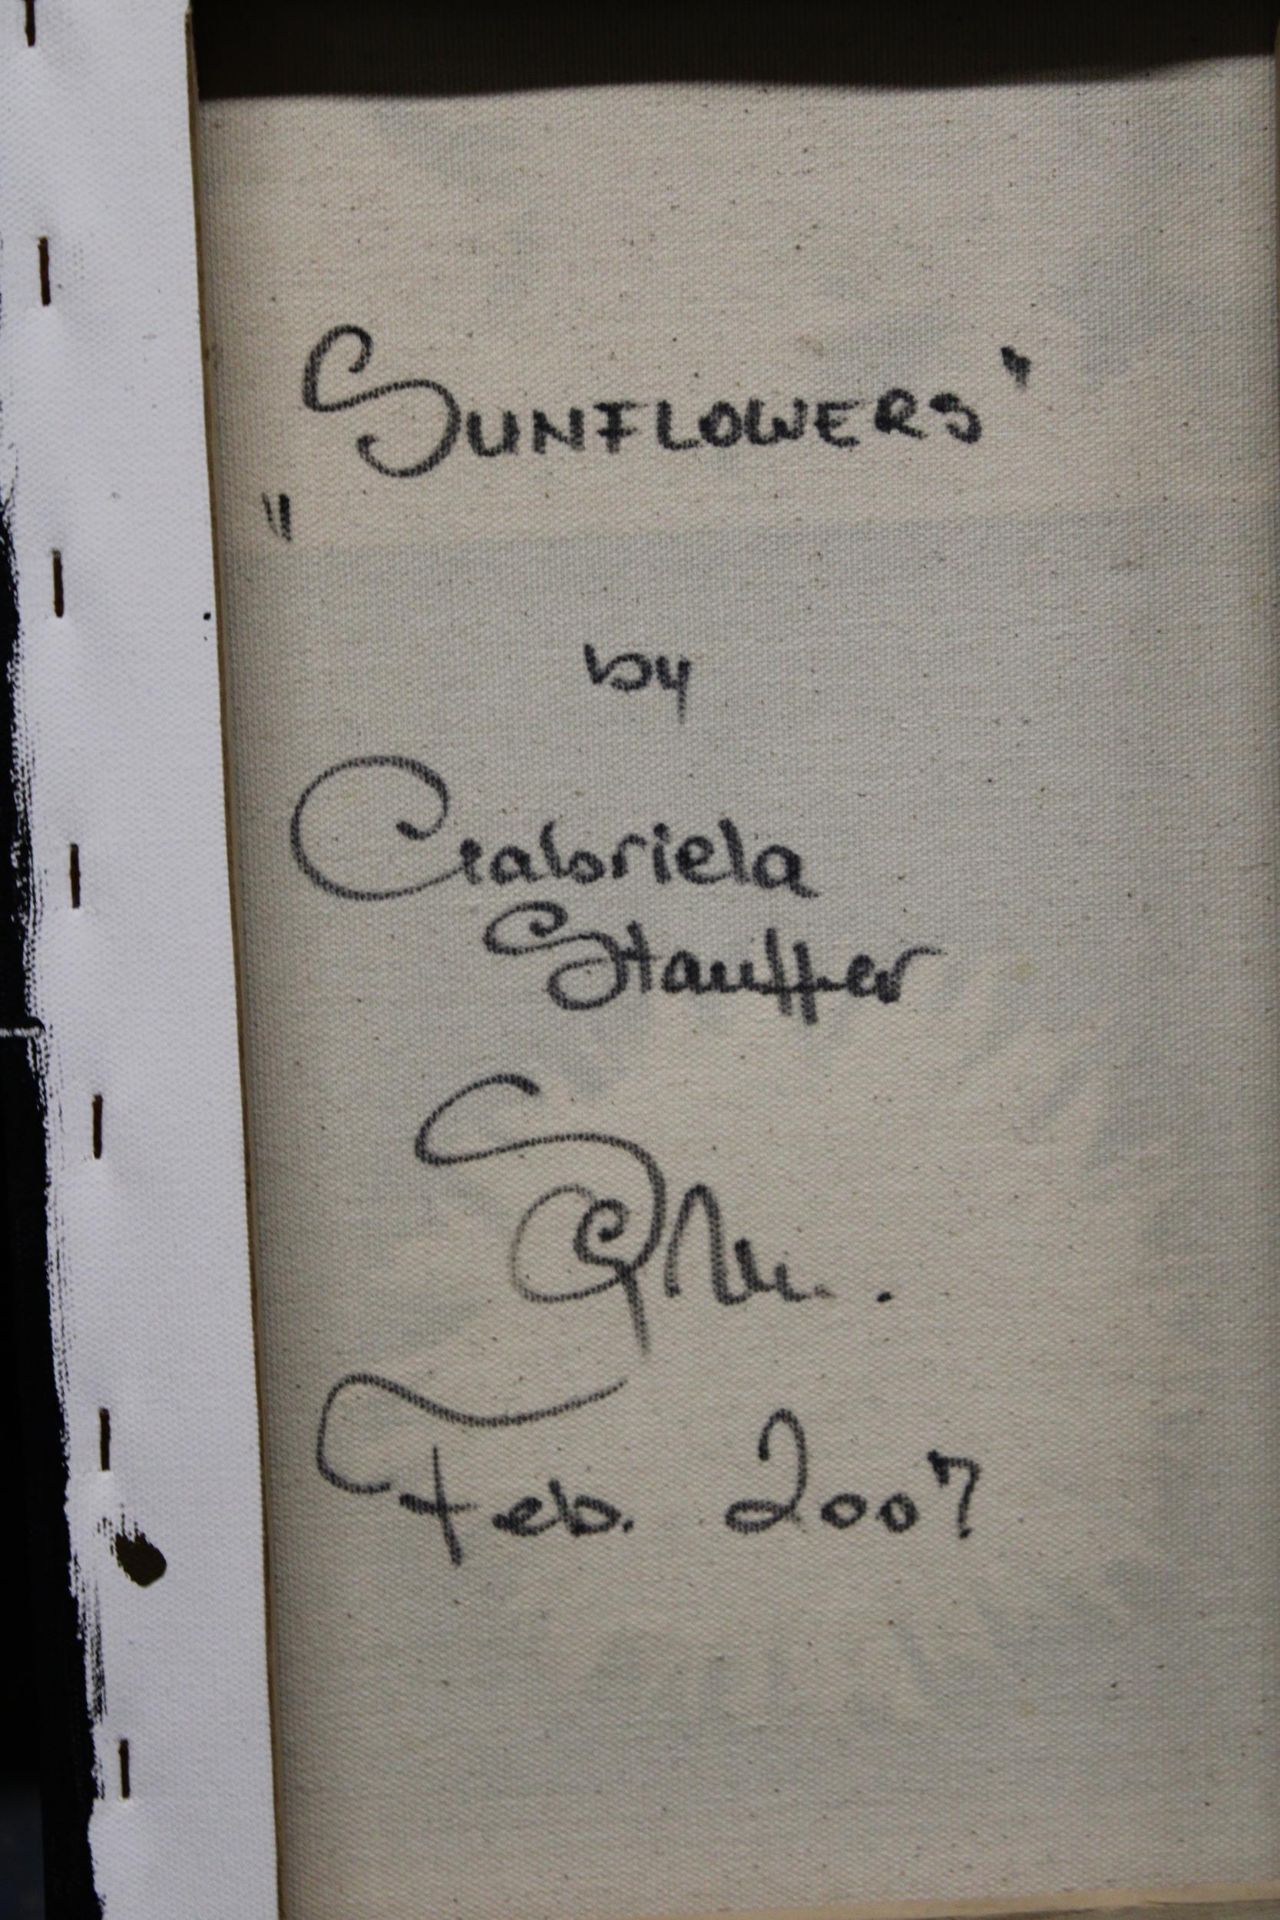 A SET OF FOUR "SUNFLOWERS" BY GABRIELA STAUFFER - FEB 2007 - Image 3 of 3